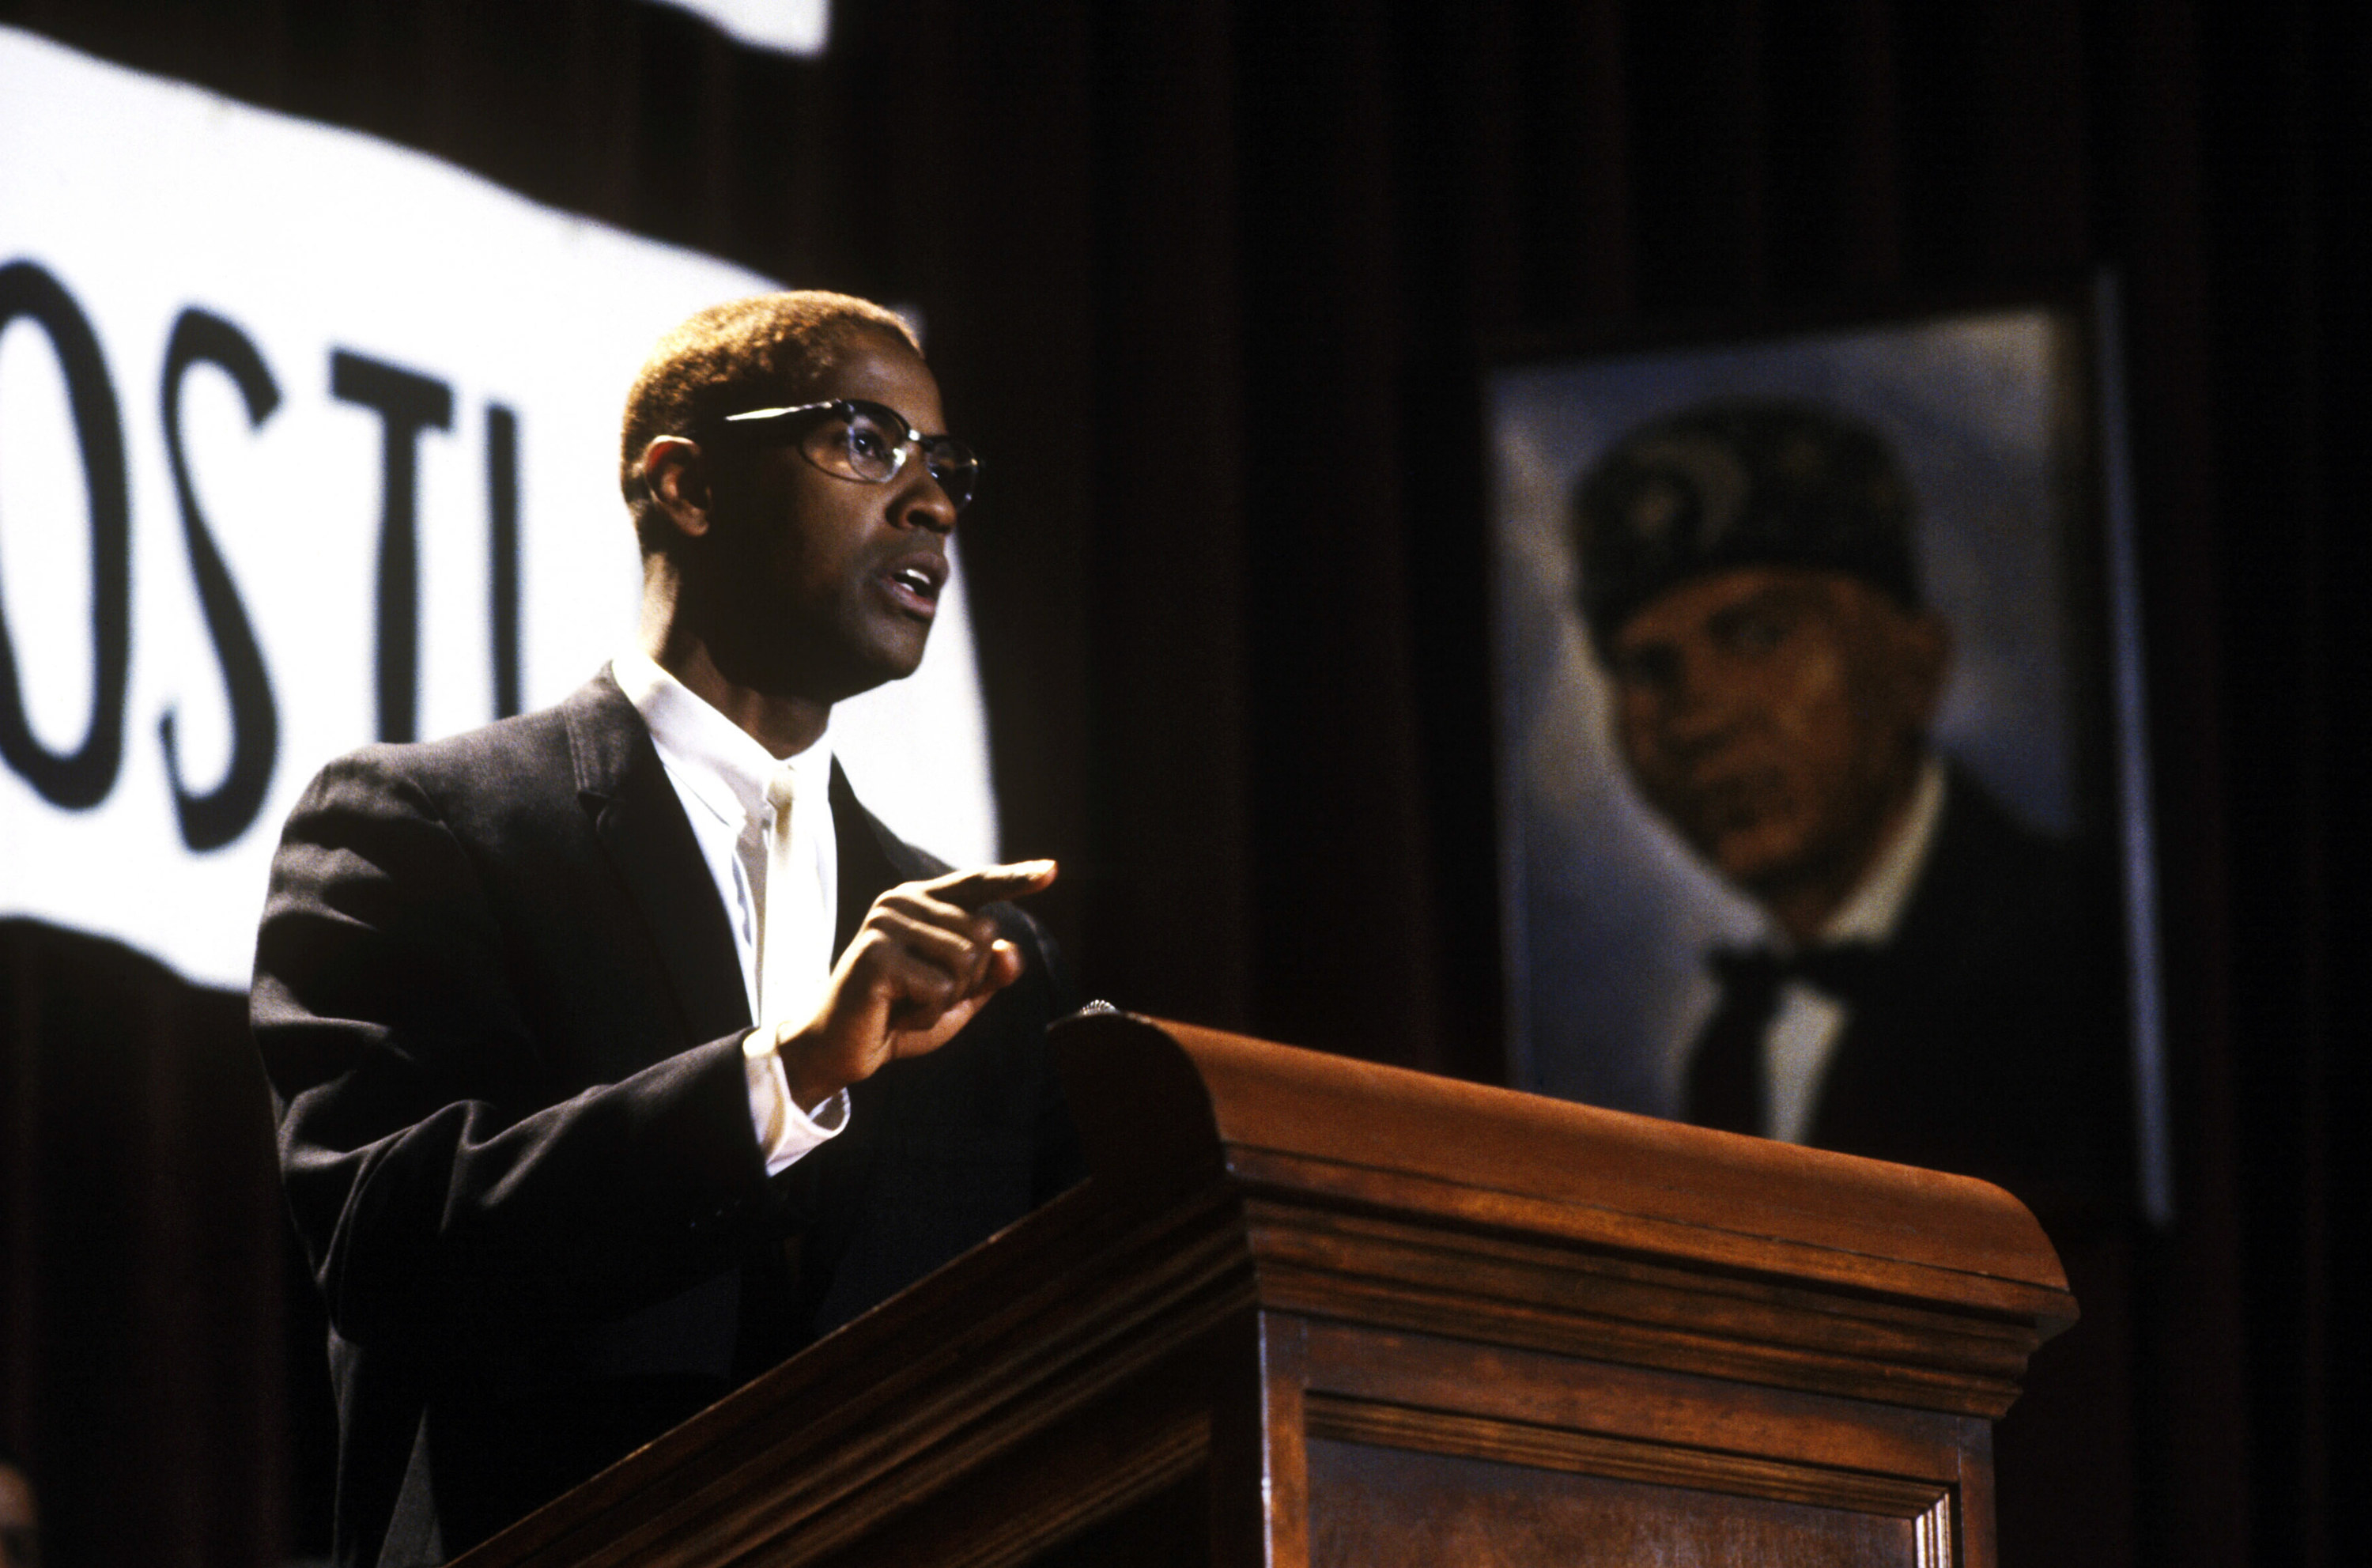 Malcolm X gives a speech at a podium